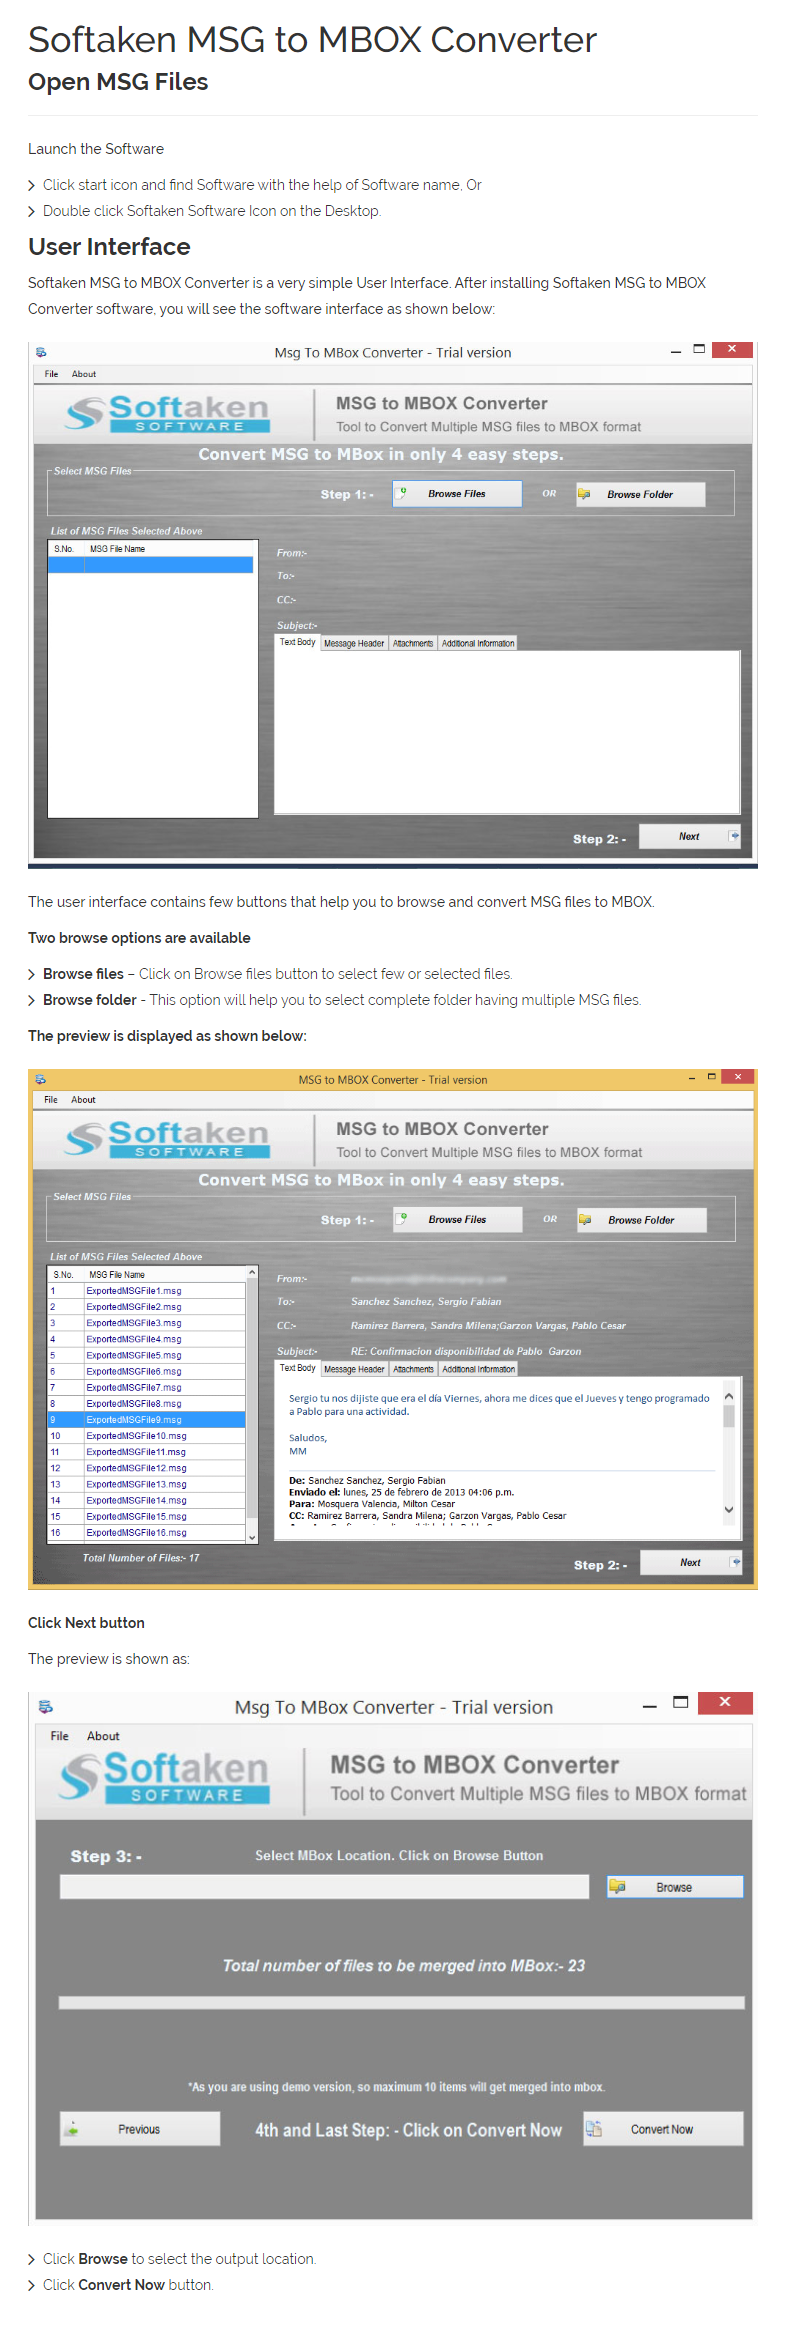 MSG to MBOX Converter User Manual